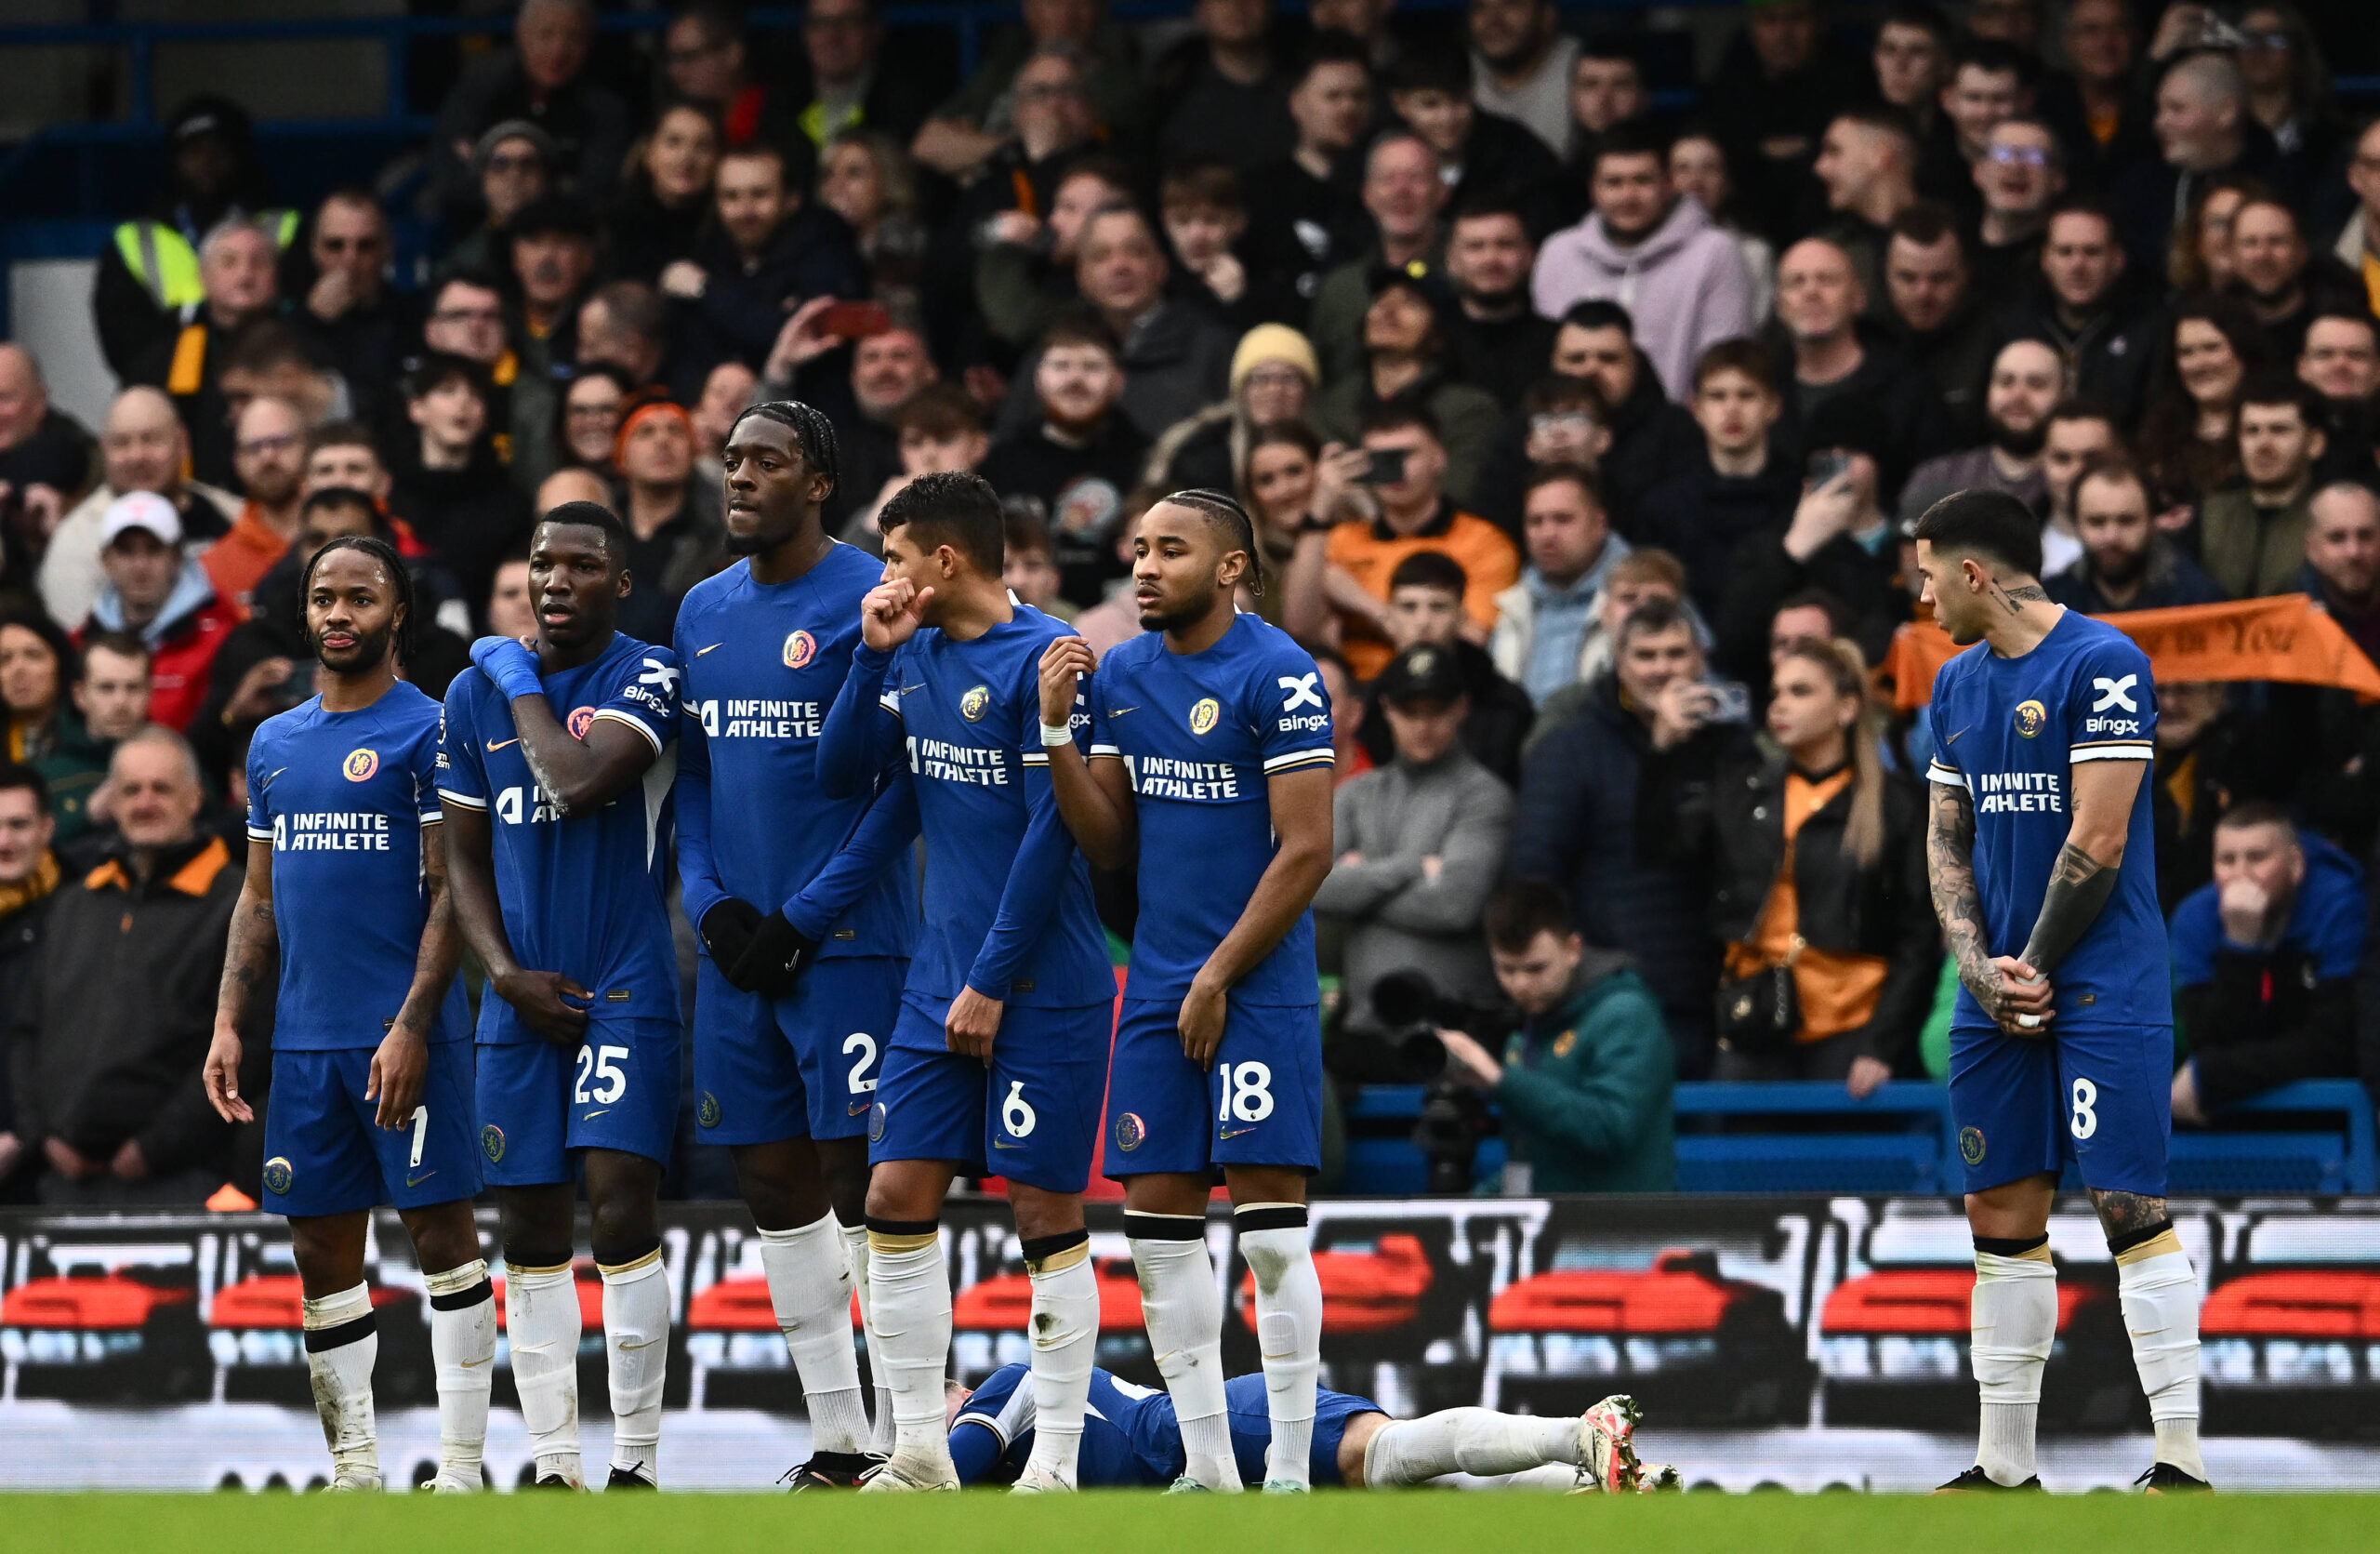 Chelsea players form a wall to stop a free kick